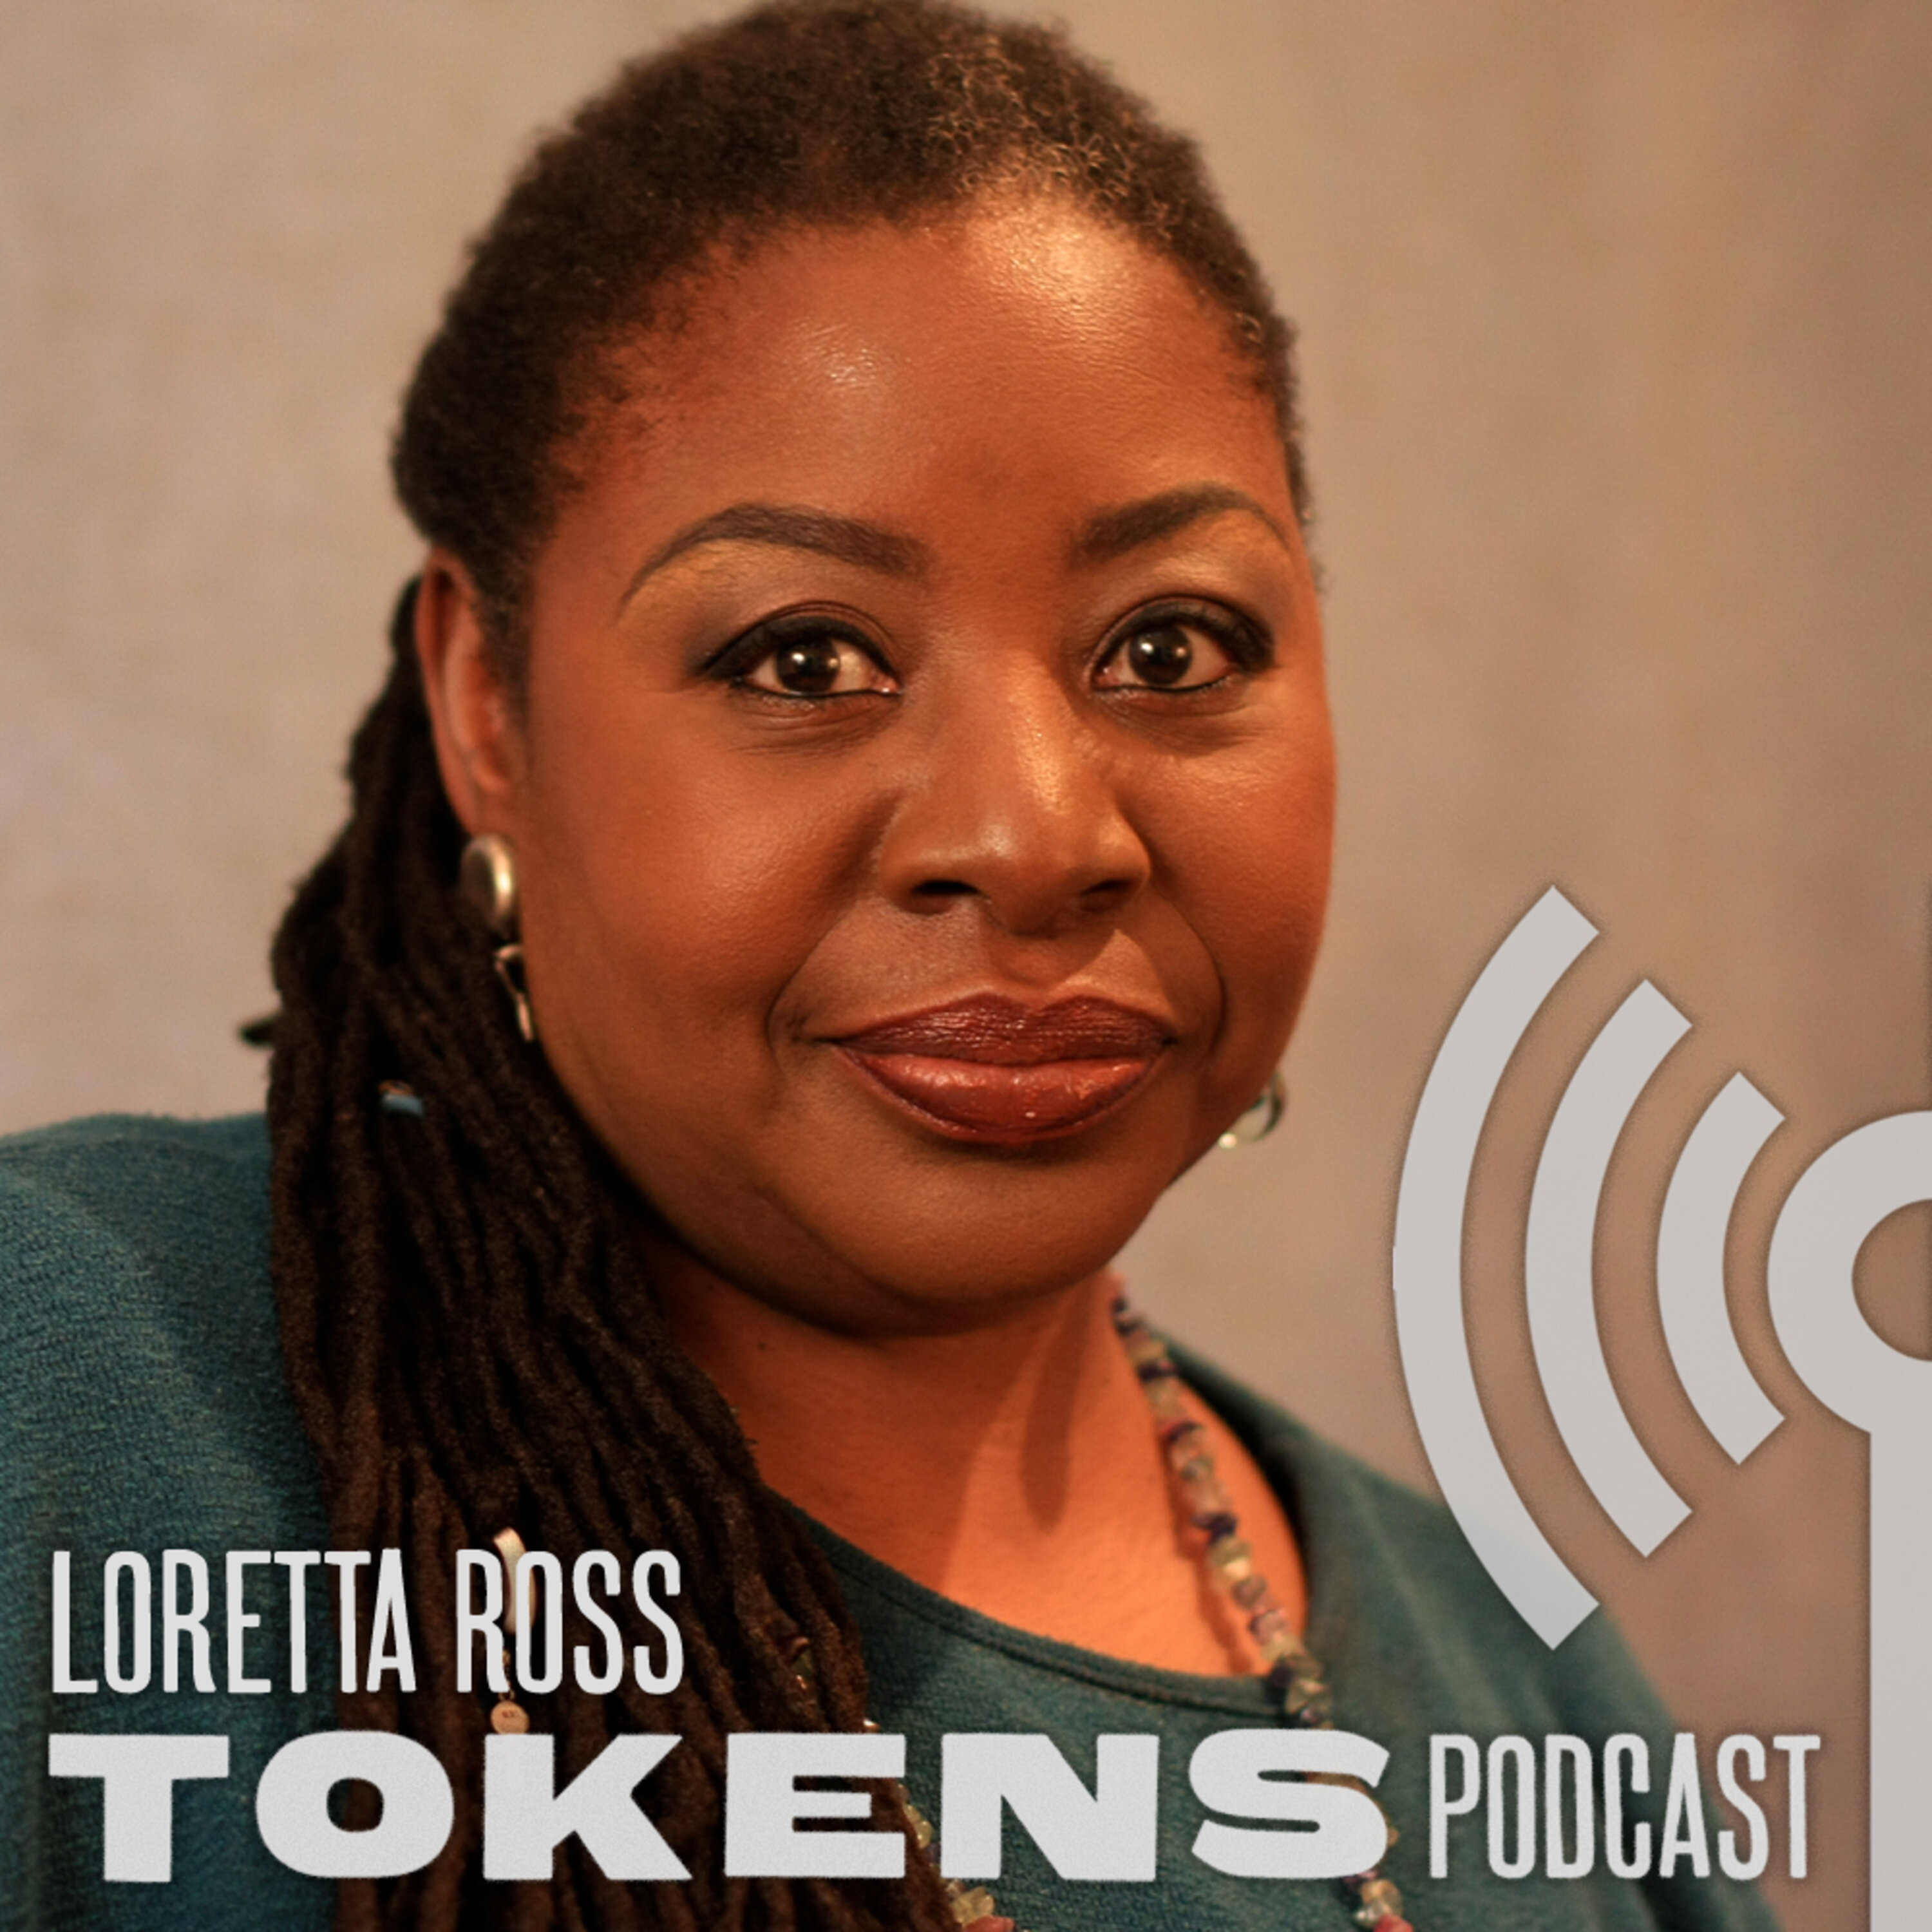 19: “I’m a Black Feminist: I Think Call Out Culture is Toxic”: Loretta Ross